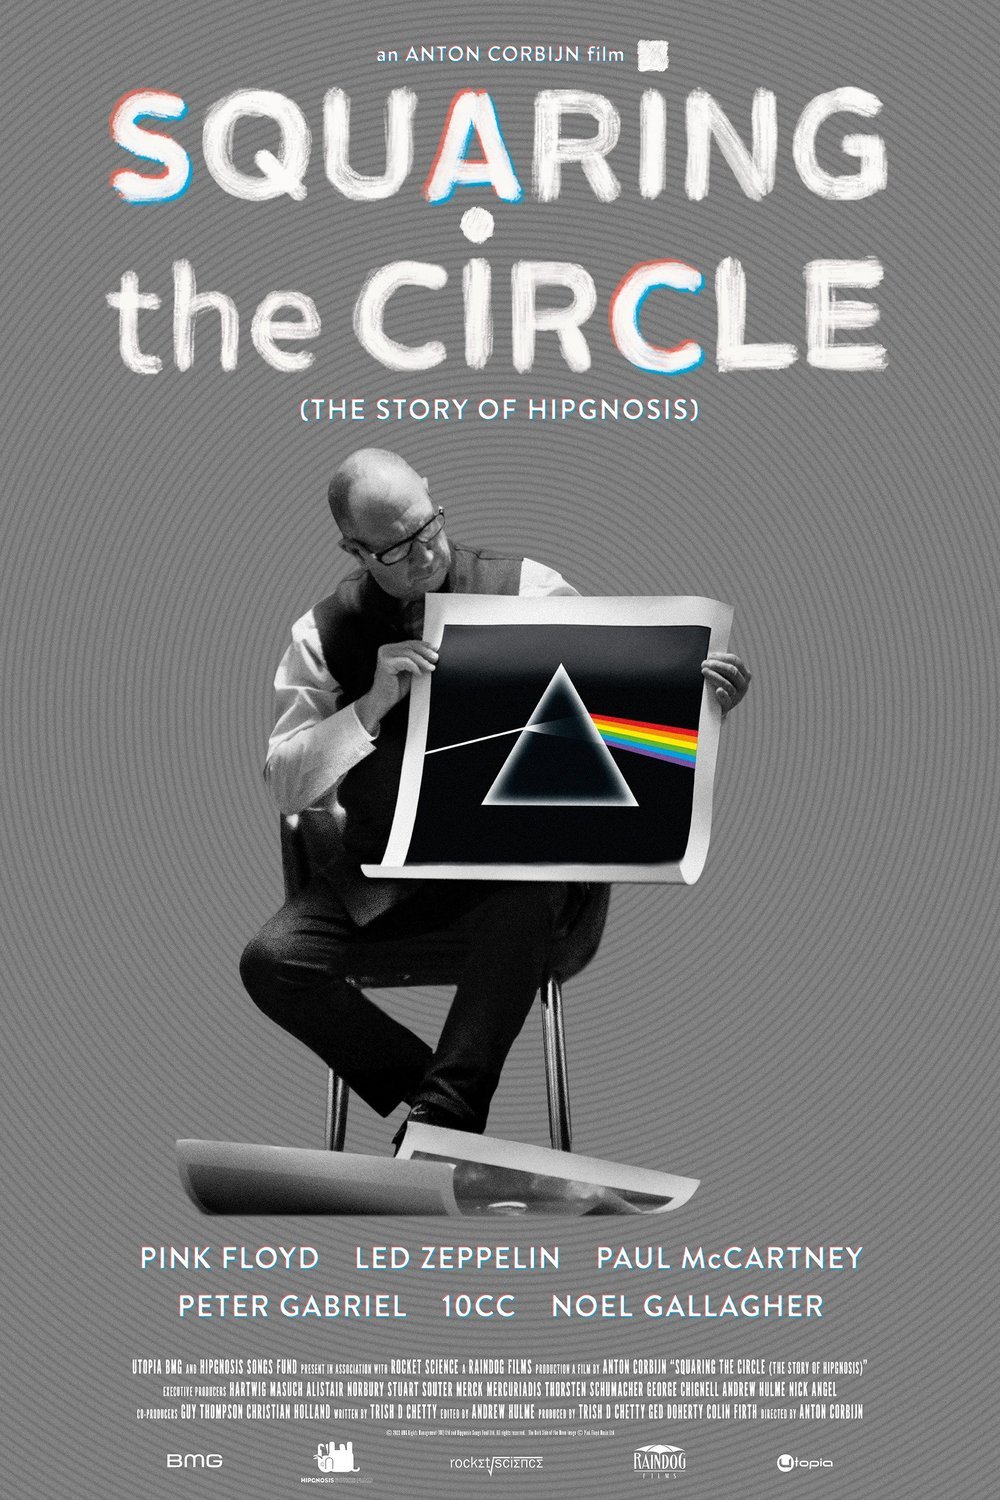 Poster of the movie Squaring the Circle (The Story of Hipgnosis)